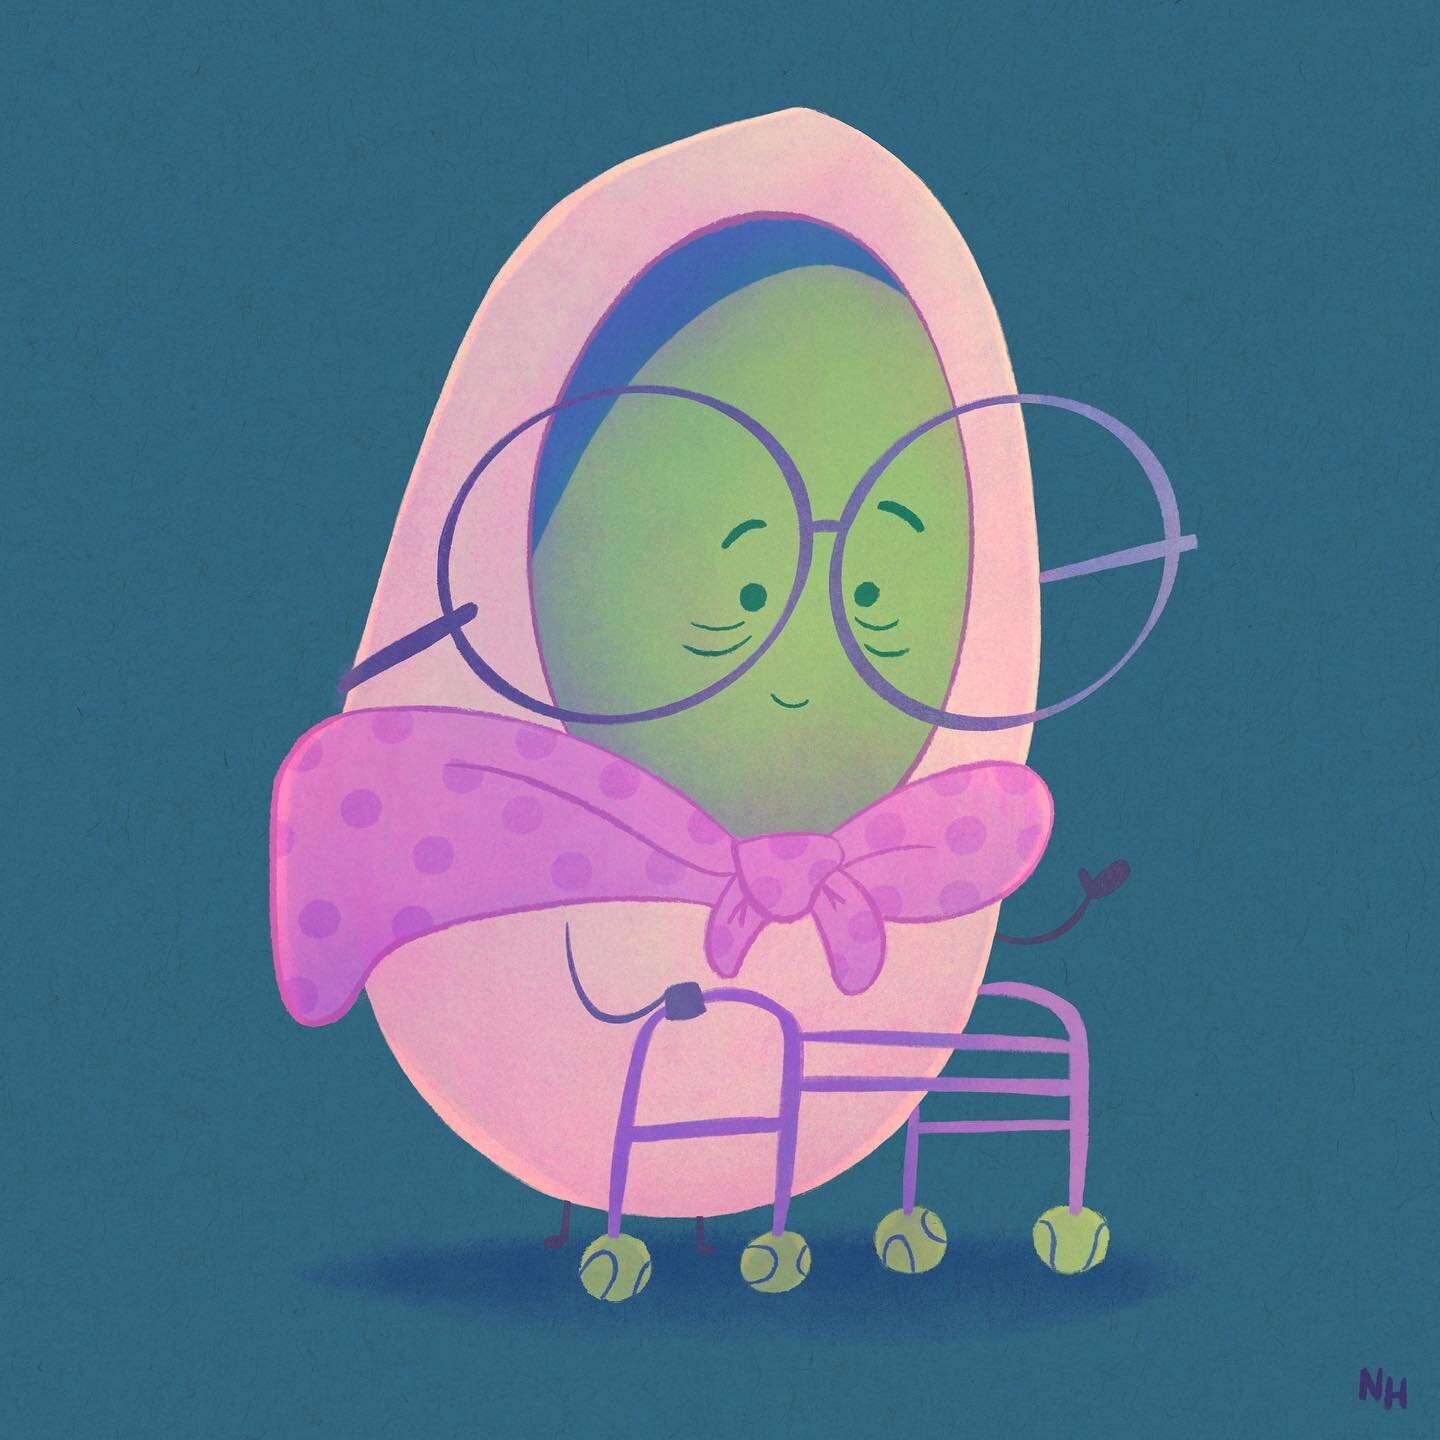 I found a pistachio granny this week. Enjoyed working on this one. Loved how it turned out. 😍 @procreate 
.
.
.
.
.
.
.
.
.
.
.

#artist #sketchbook #sketchbooks #sketch #sketching #draw #drawing #drawings  #doodle #doodles #love #digitalart  #timel